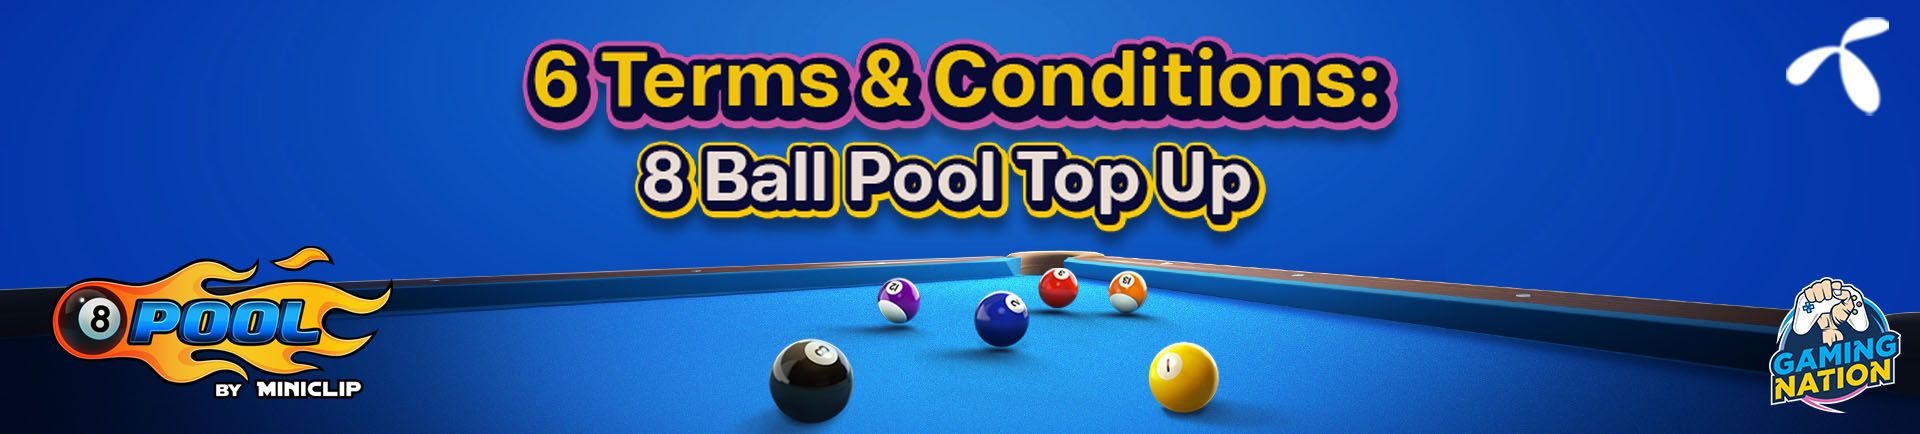 6 Terms & Conditions for 8 Ball Pool Top Up 